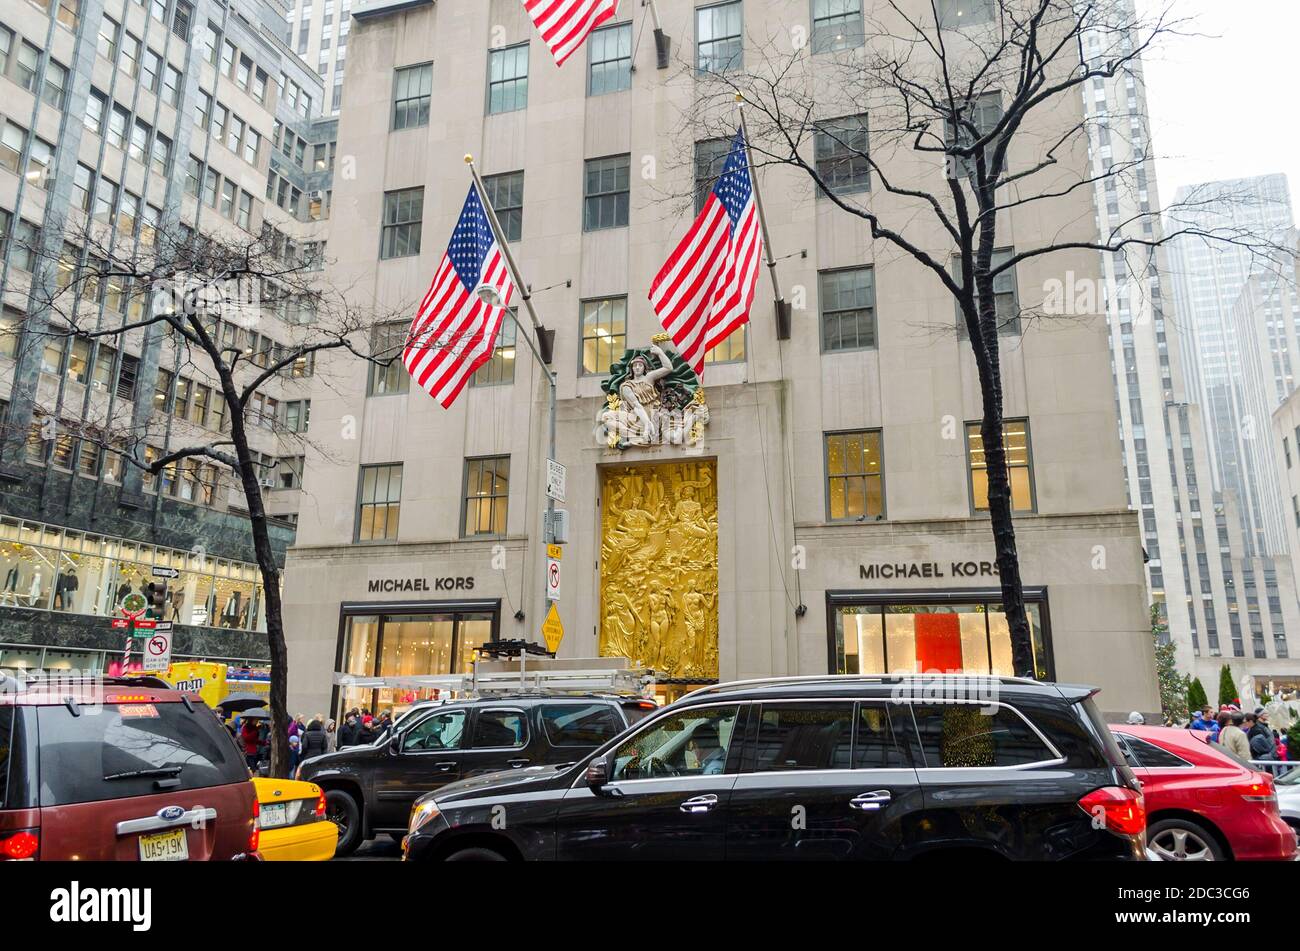 Michael Kors Store Entrance in Manhattan on Christmas Holidays. Busy